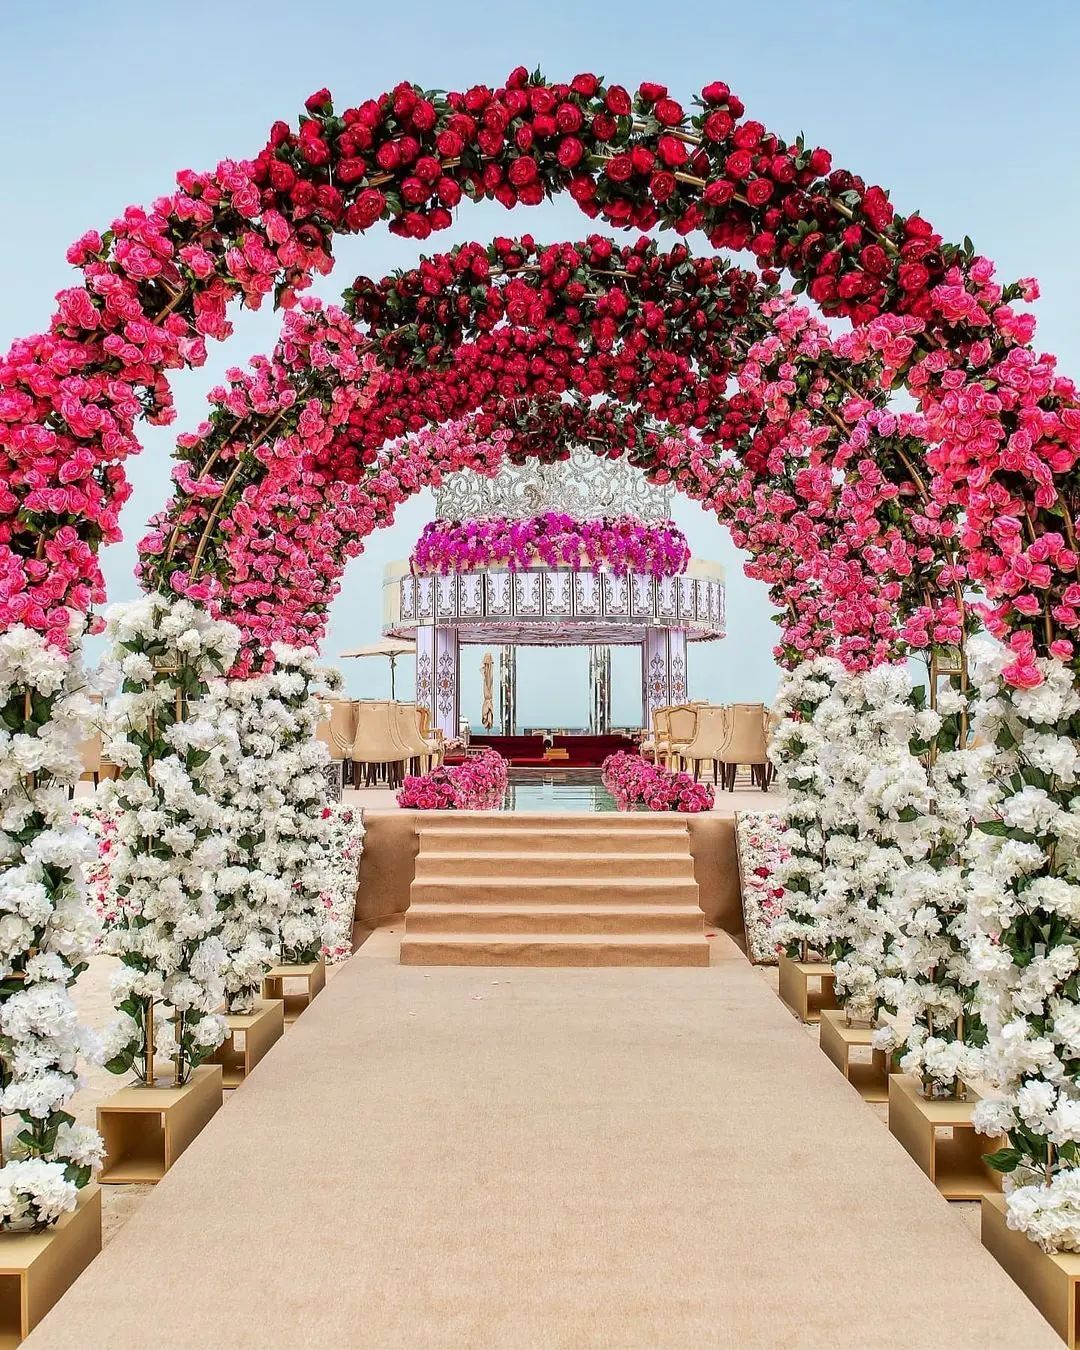 TOP 15 Flower Wedding Stage Decoration Ideas You Need To Check Right NOW